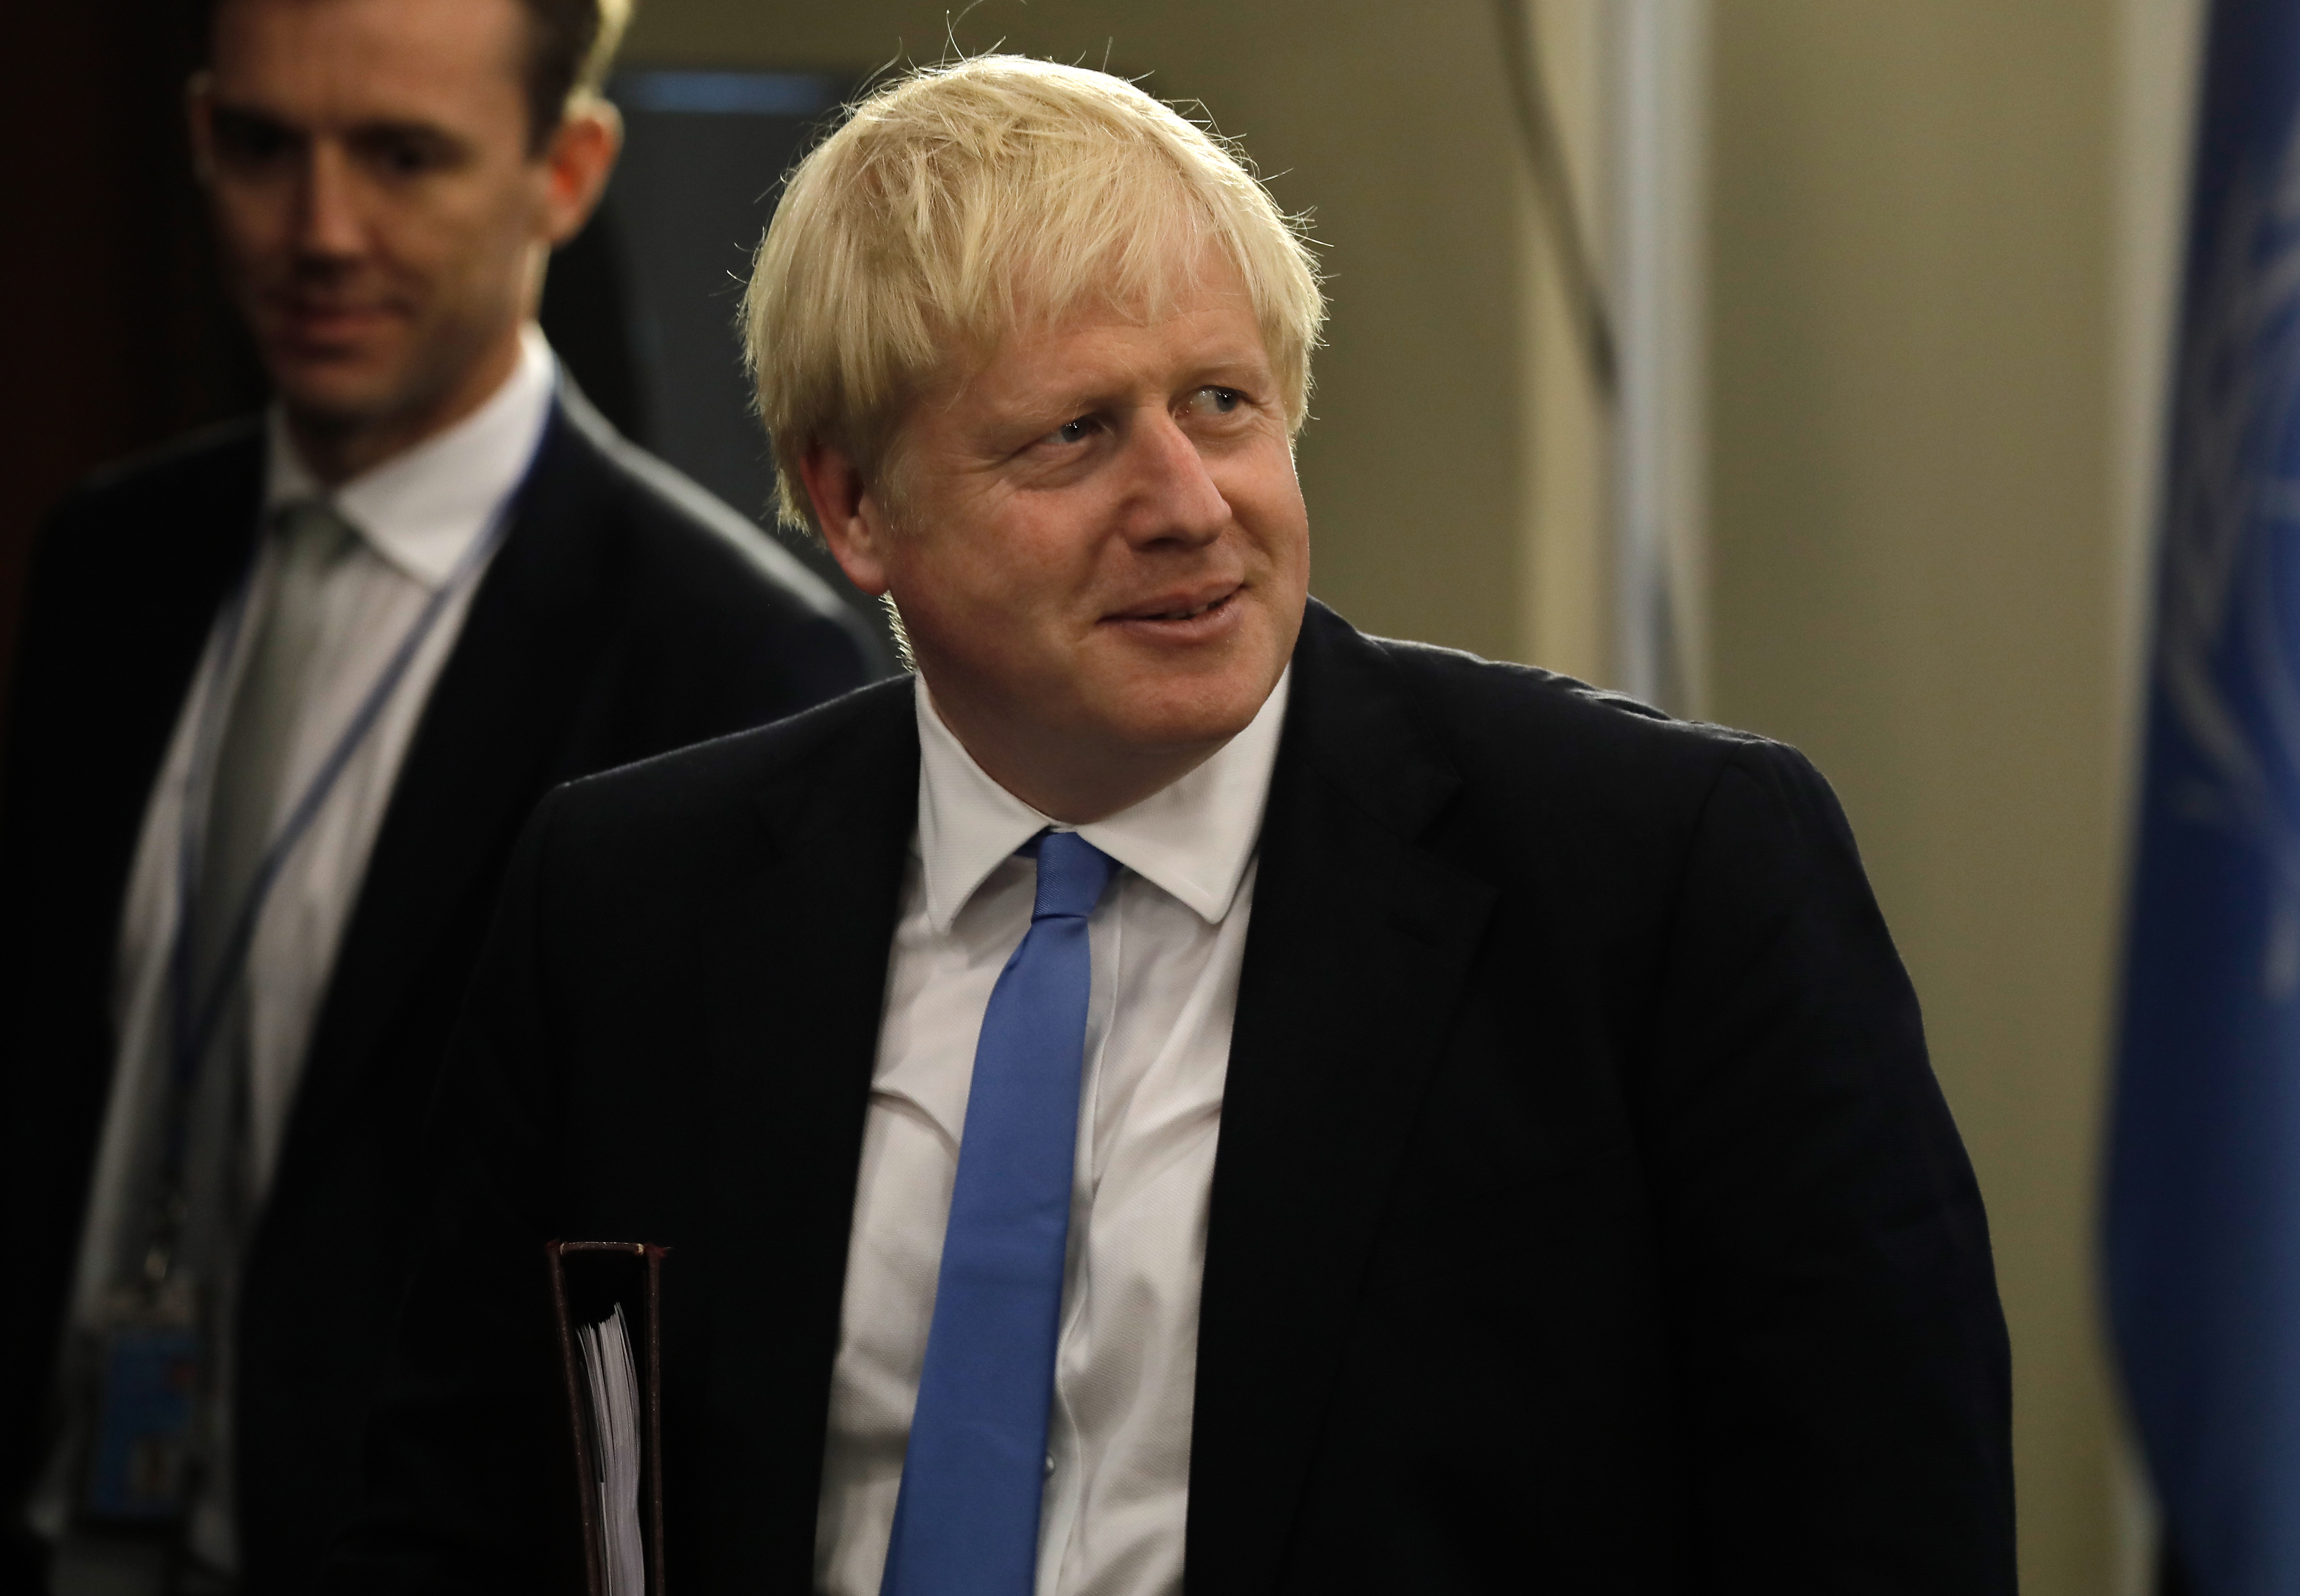 epa07864543 British Prime Minister Boris Johnson departs from the 2019 Climate Action Summit which is being held in advance of the General Debate of the General Assembly of the United Nations at United Nations Headquarters in New York, New York, USA, 23 September 2019. World Leaders have been invited to speak at the event, which was organized by the United Nations Secretary-General Antonio Guterres, for the purpose of proposing plans for addressing global climate change. The General Debate of the 74th session of the UN General Assembly begins on 24 September.  EPA/PETER FOLEY